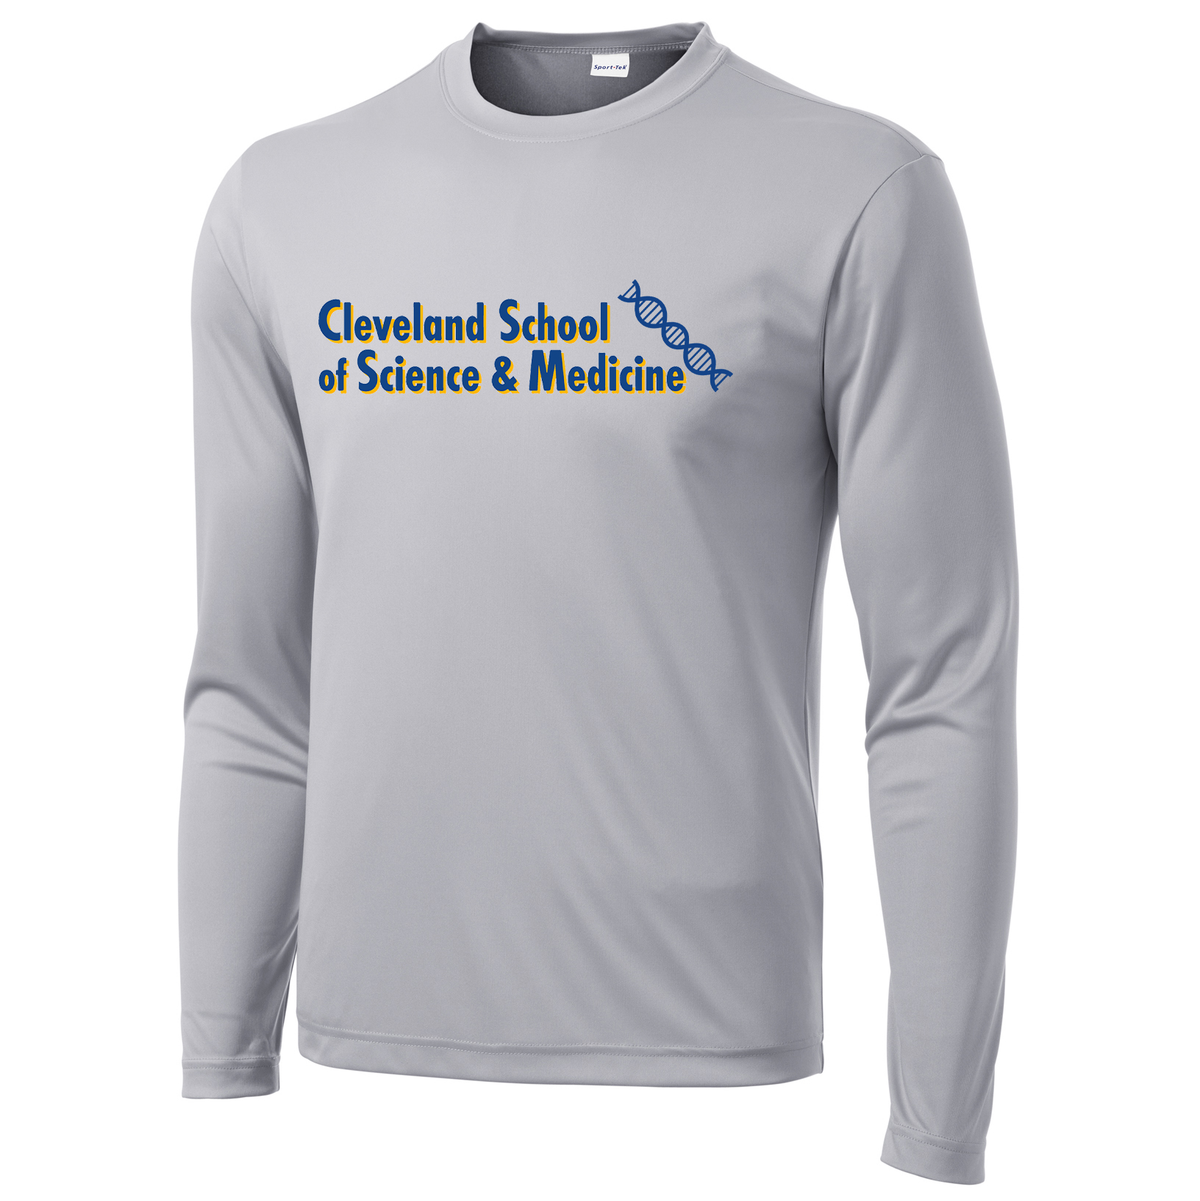 Cleveland School of Science and Medicine Long Sleeve Performance Shirt